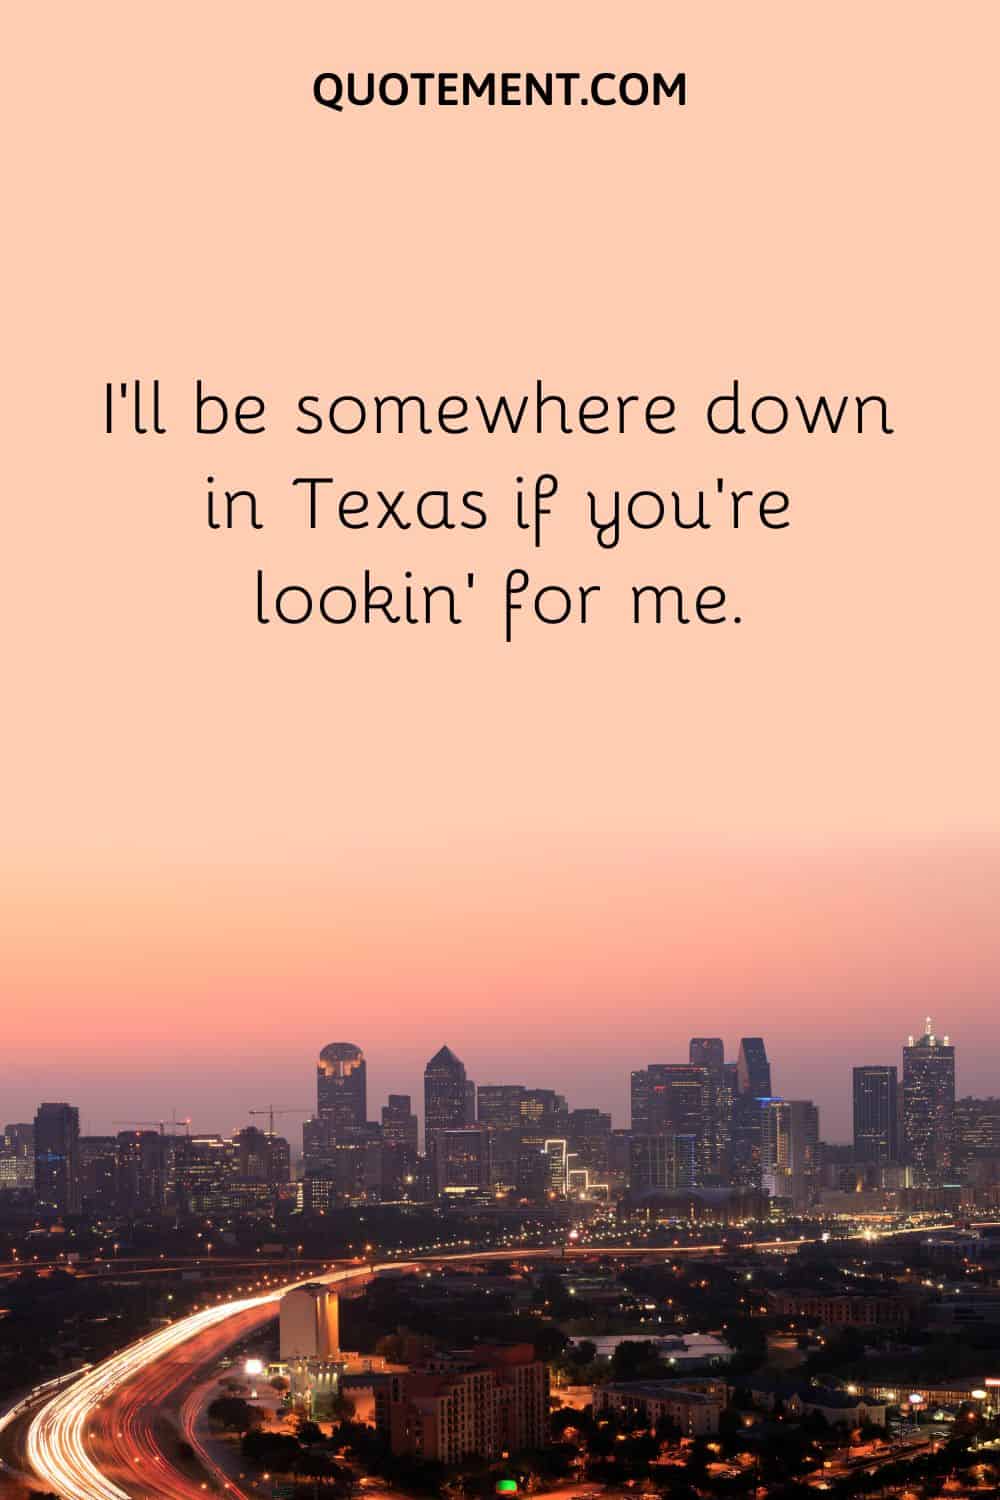 I’ll be somewhere down in Texas if you’re lookin’ for me.